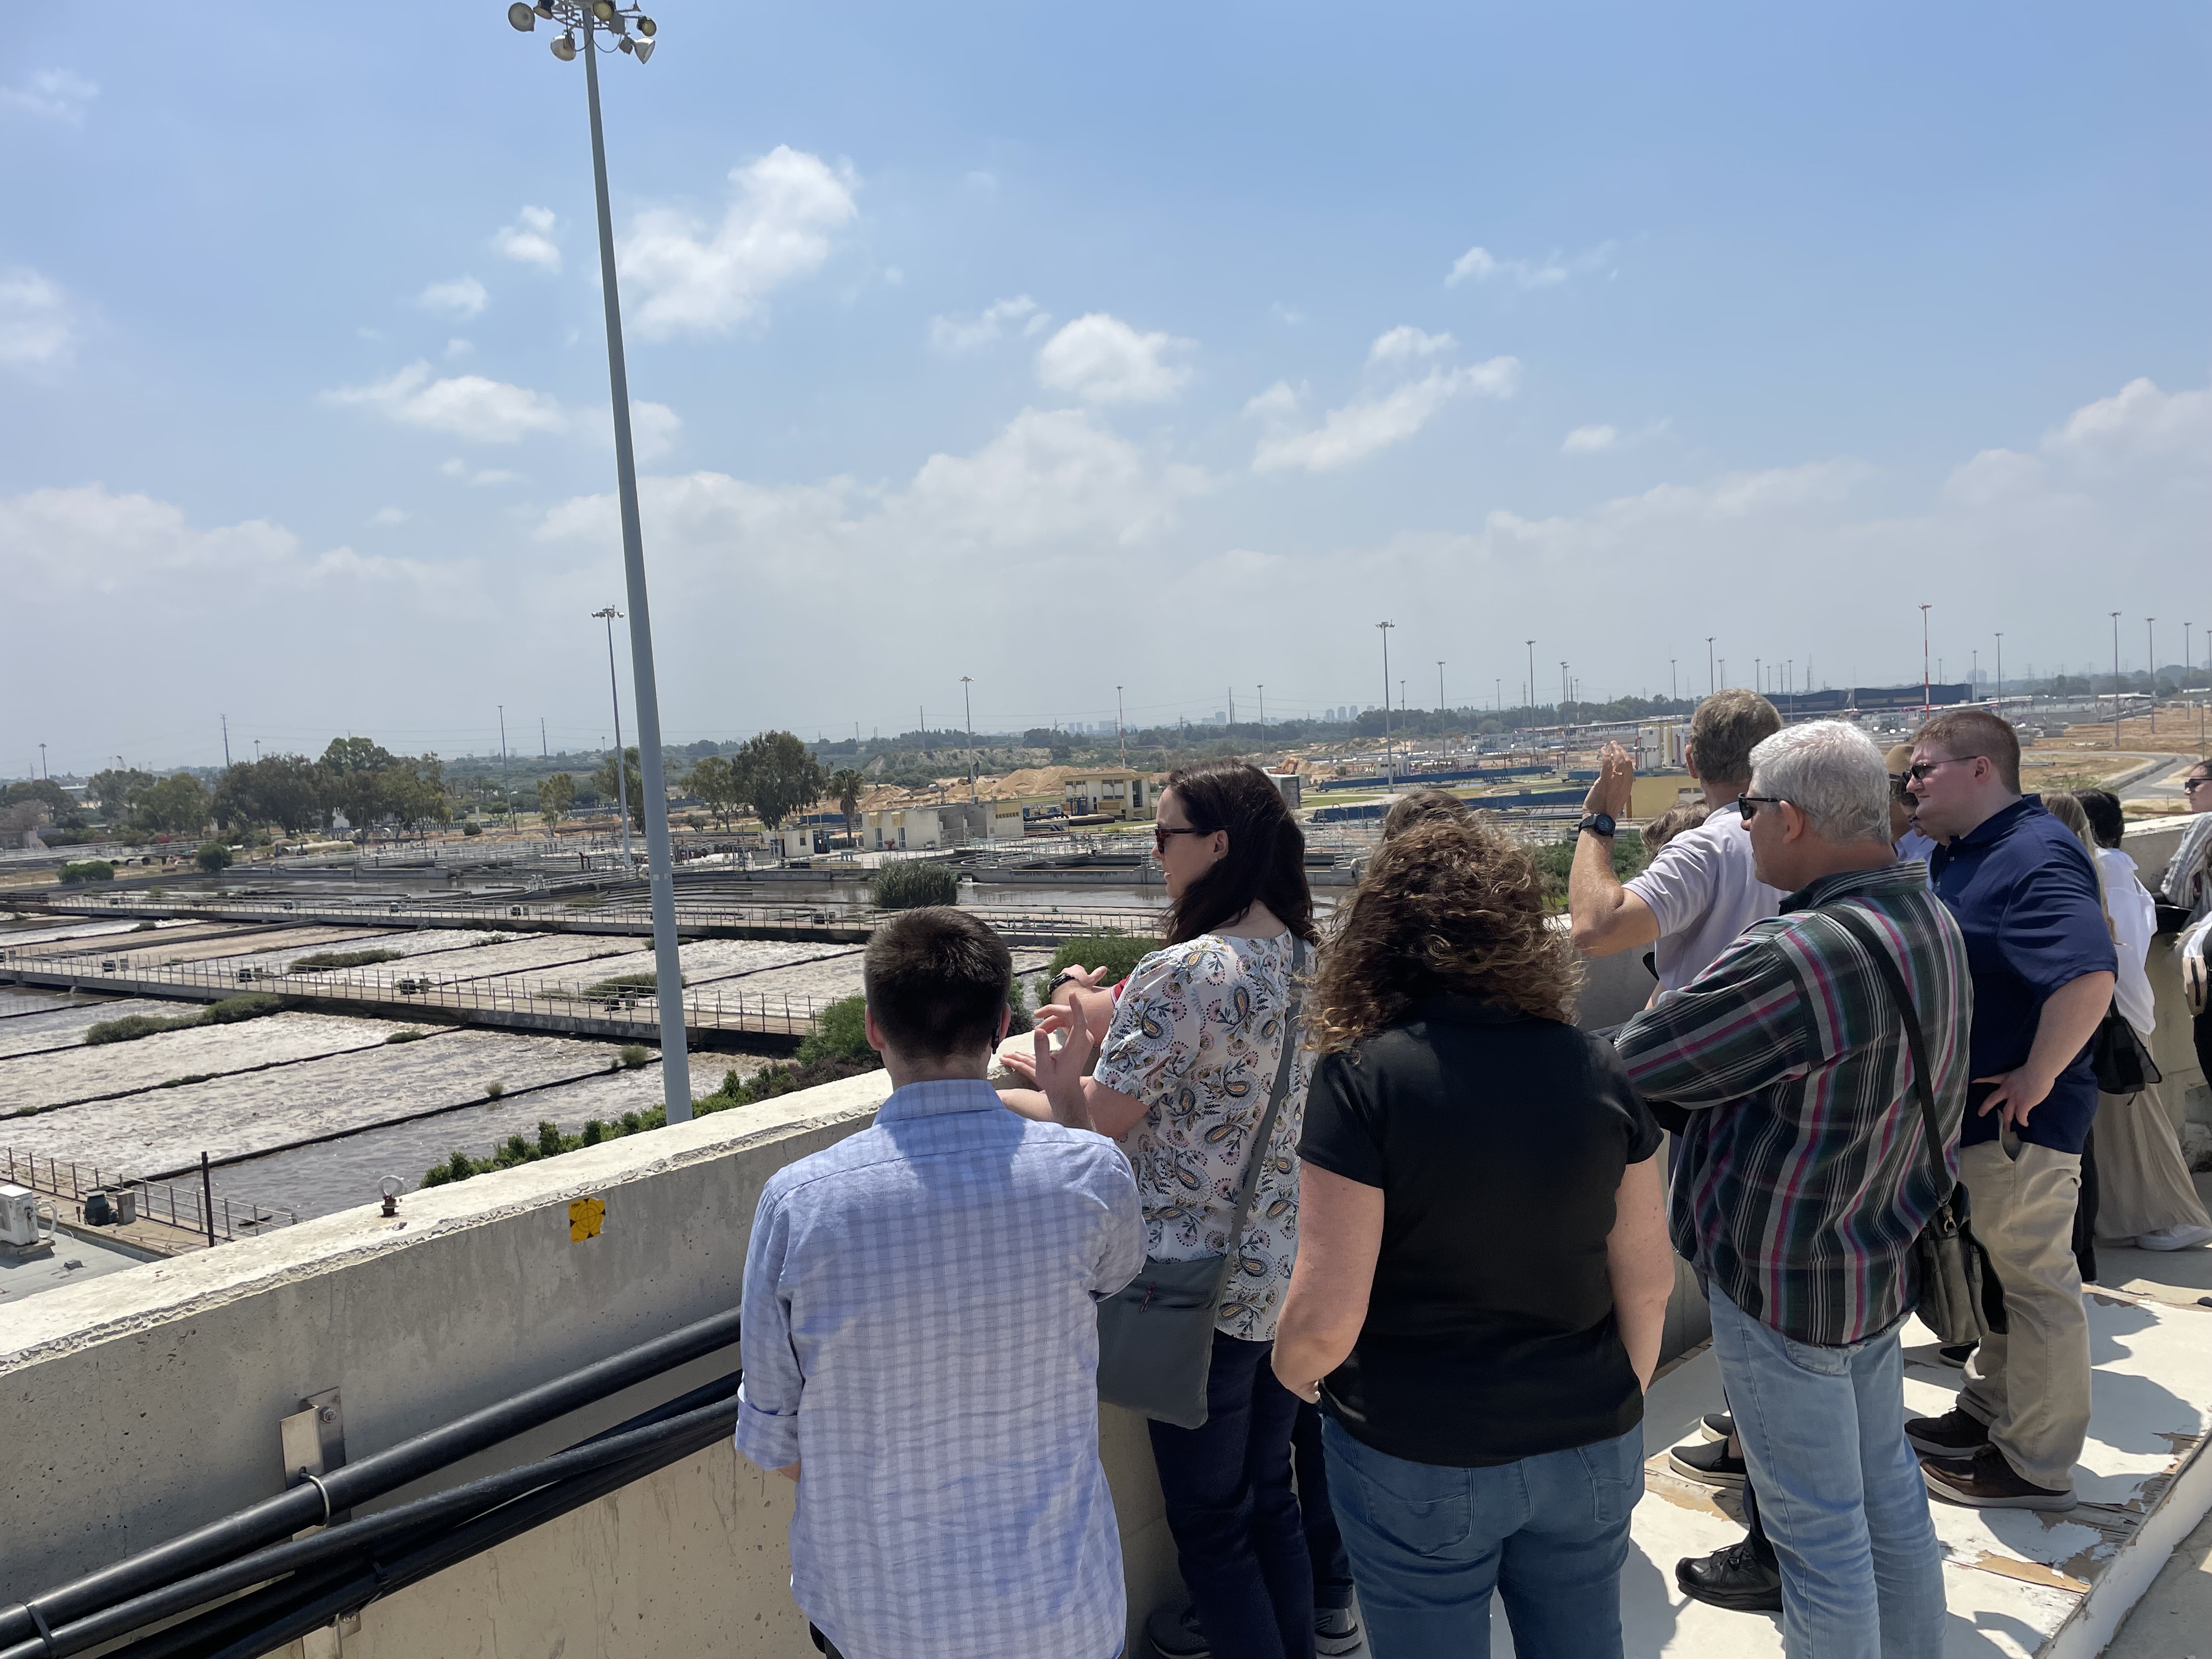 Texas A&M students visiting the Shafdan Wastewater Treatment Plant peer out at the bioreactor pools where bacteria progressively break down organic material as the water flows through each of the pools.